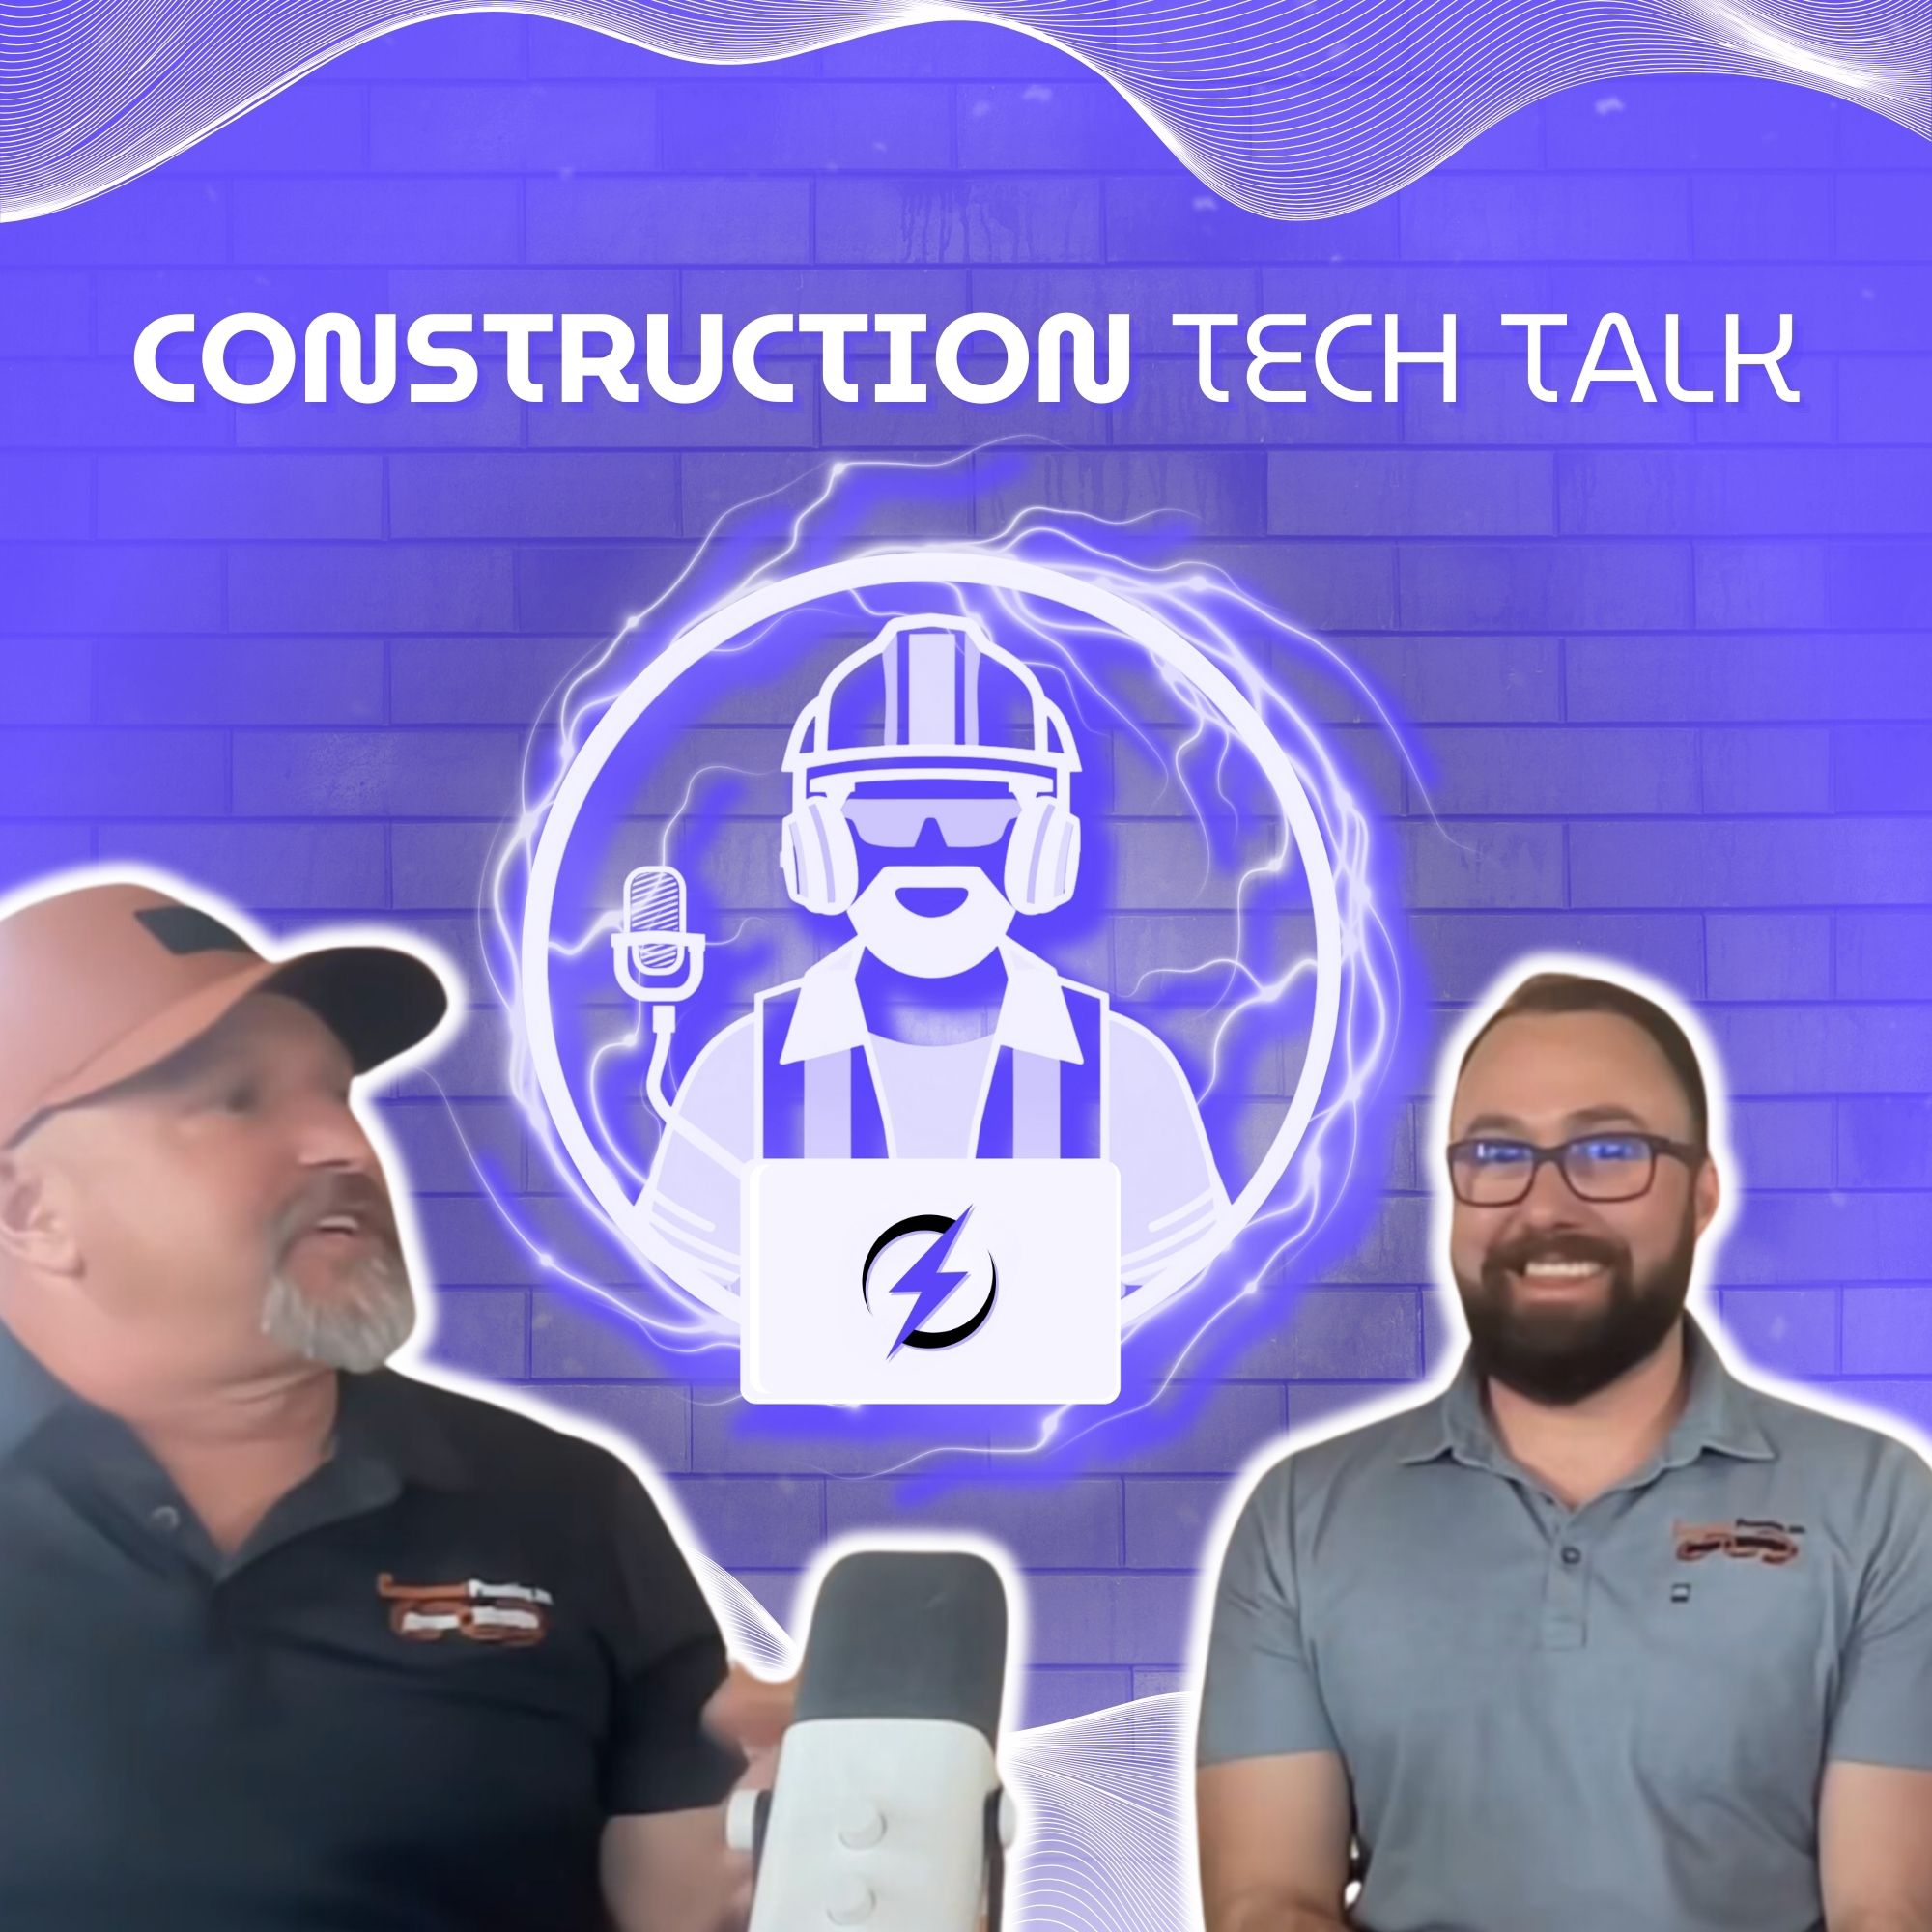 Construction Tech Talk - The Next Generation of Plumbing with Copperhead Plumbing, Plumbing Company Growth